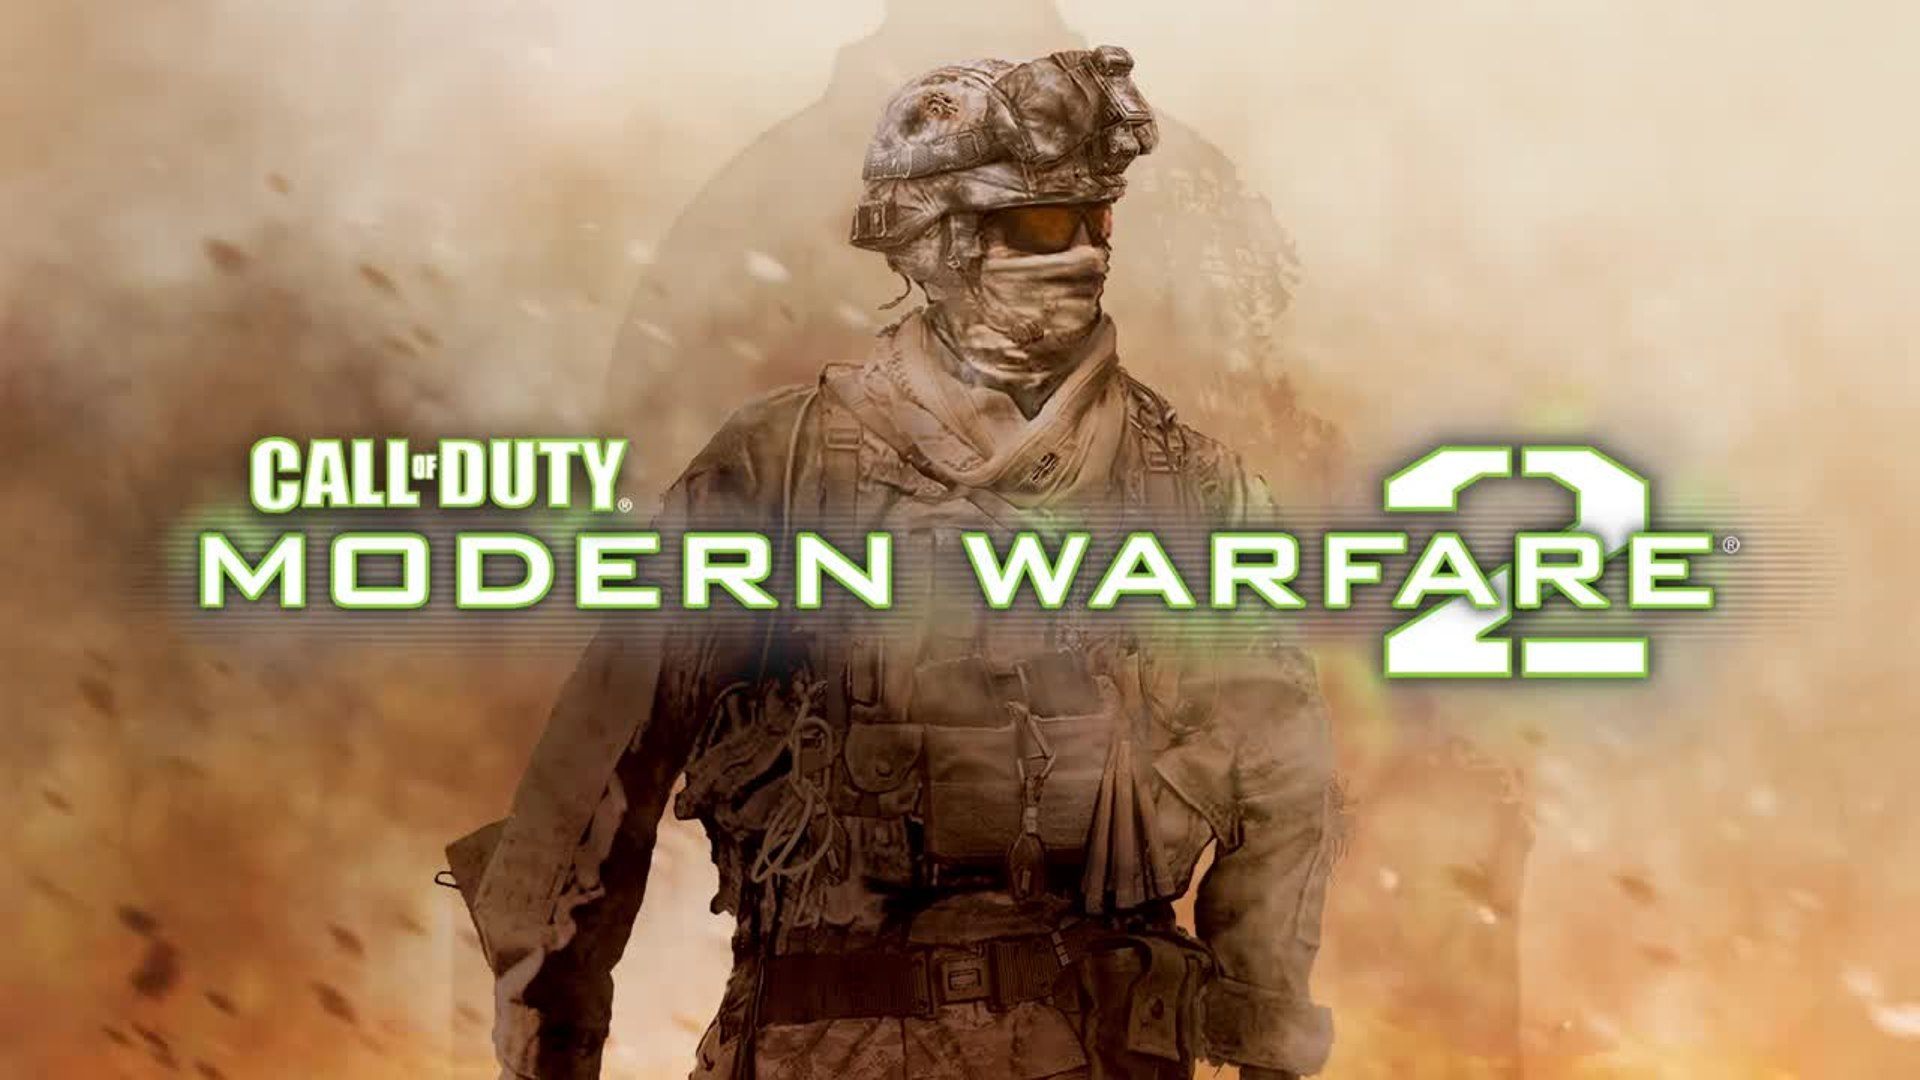 modern-warfare-ii-may-be-the-title-of-call-of-duty-2022-confusingly